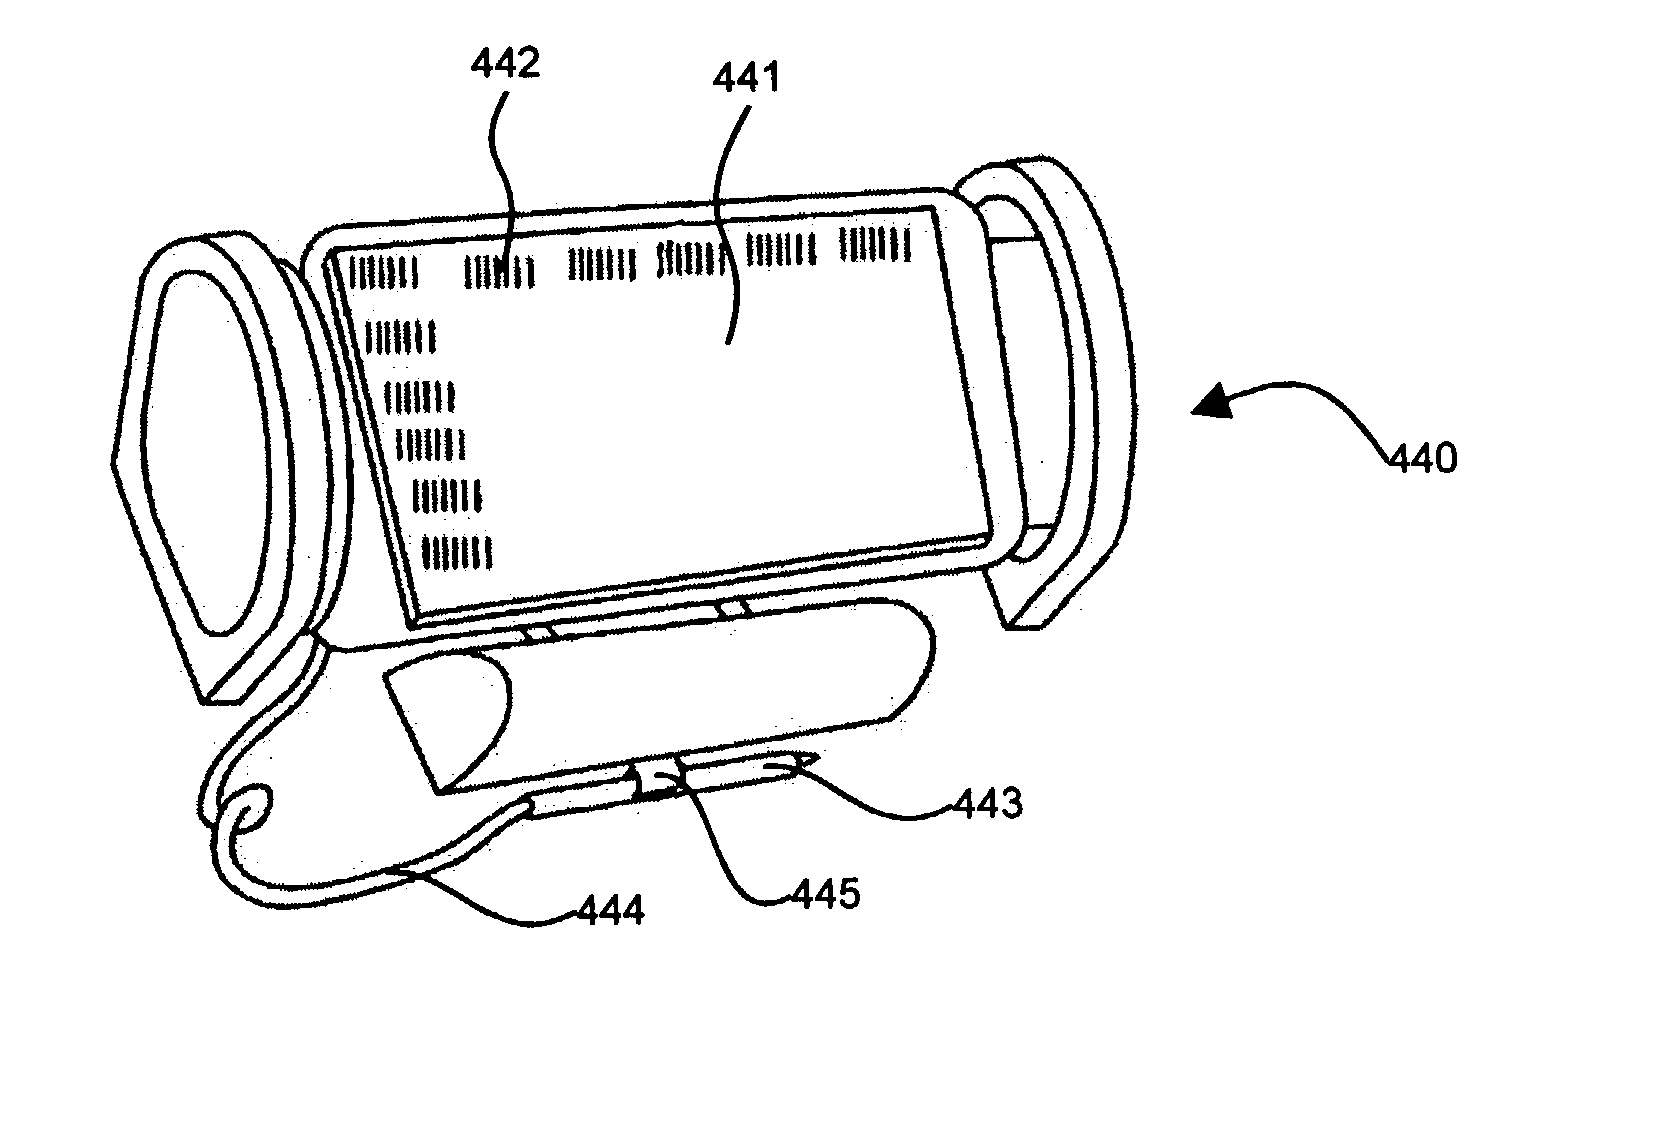 Wearable computing system, method and device